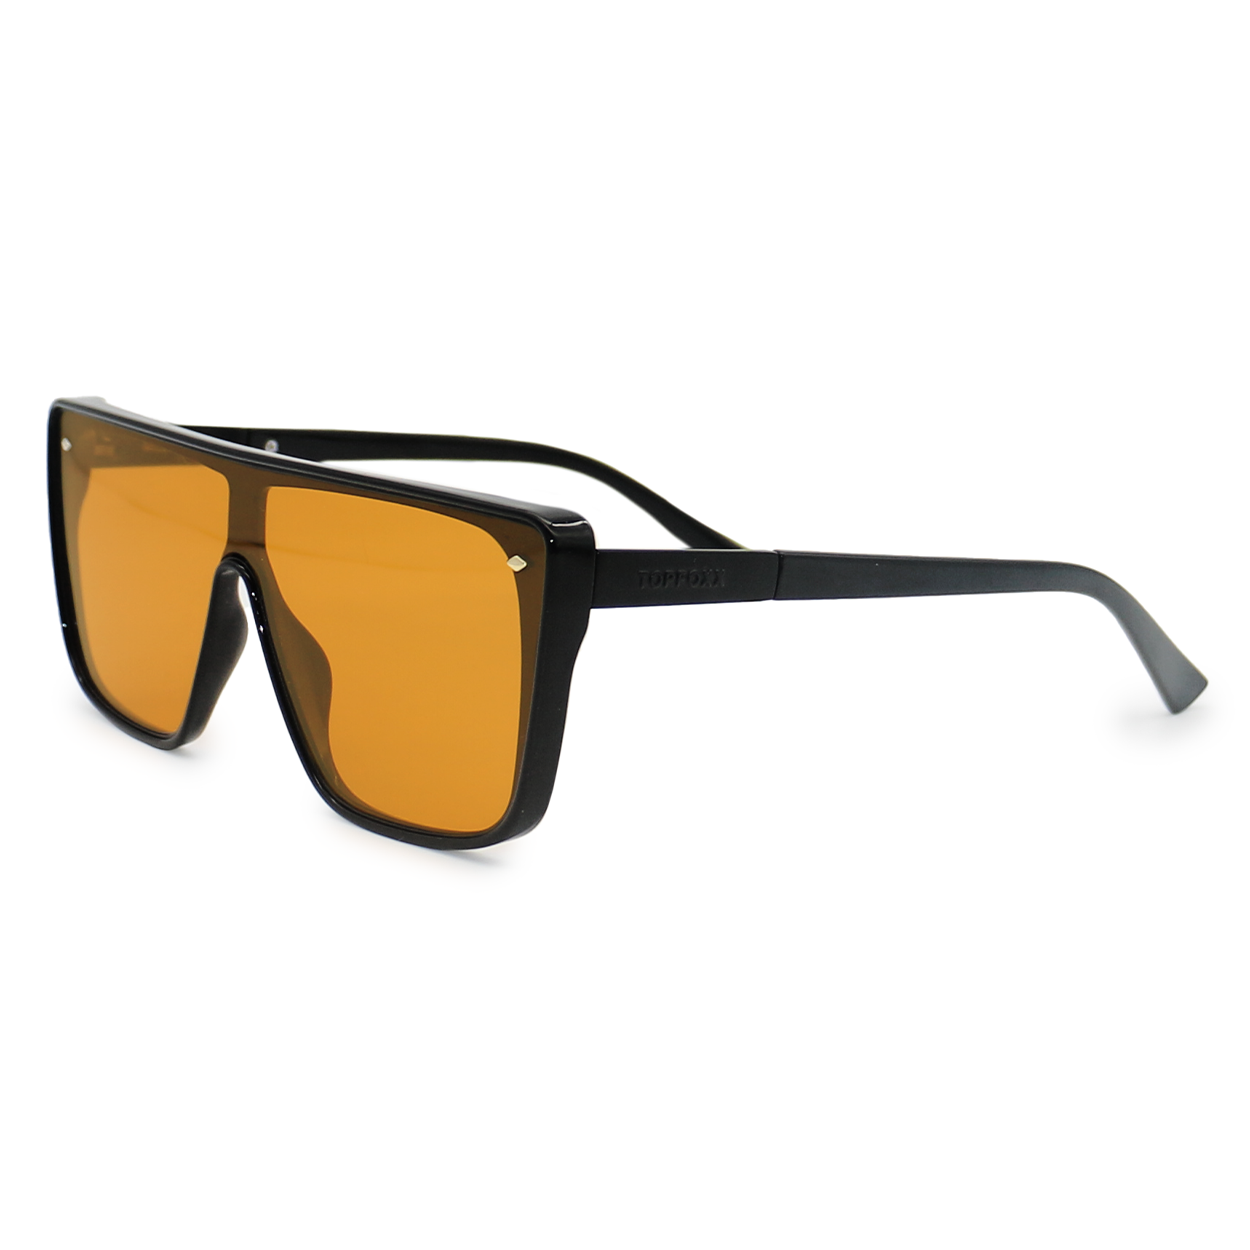 Sustainable Rayz Sunglasses | Limited Edition Yellow